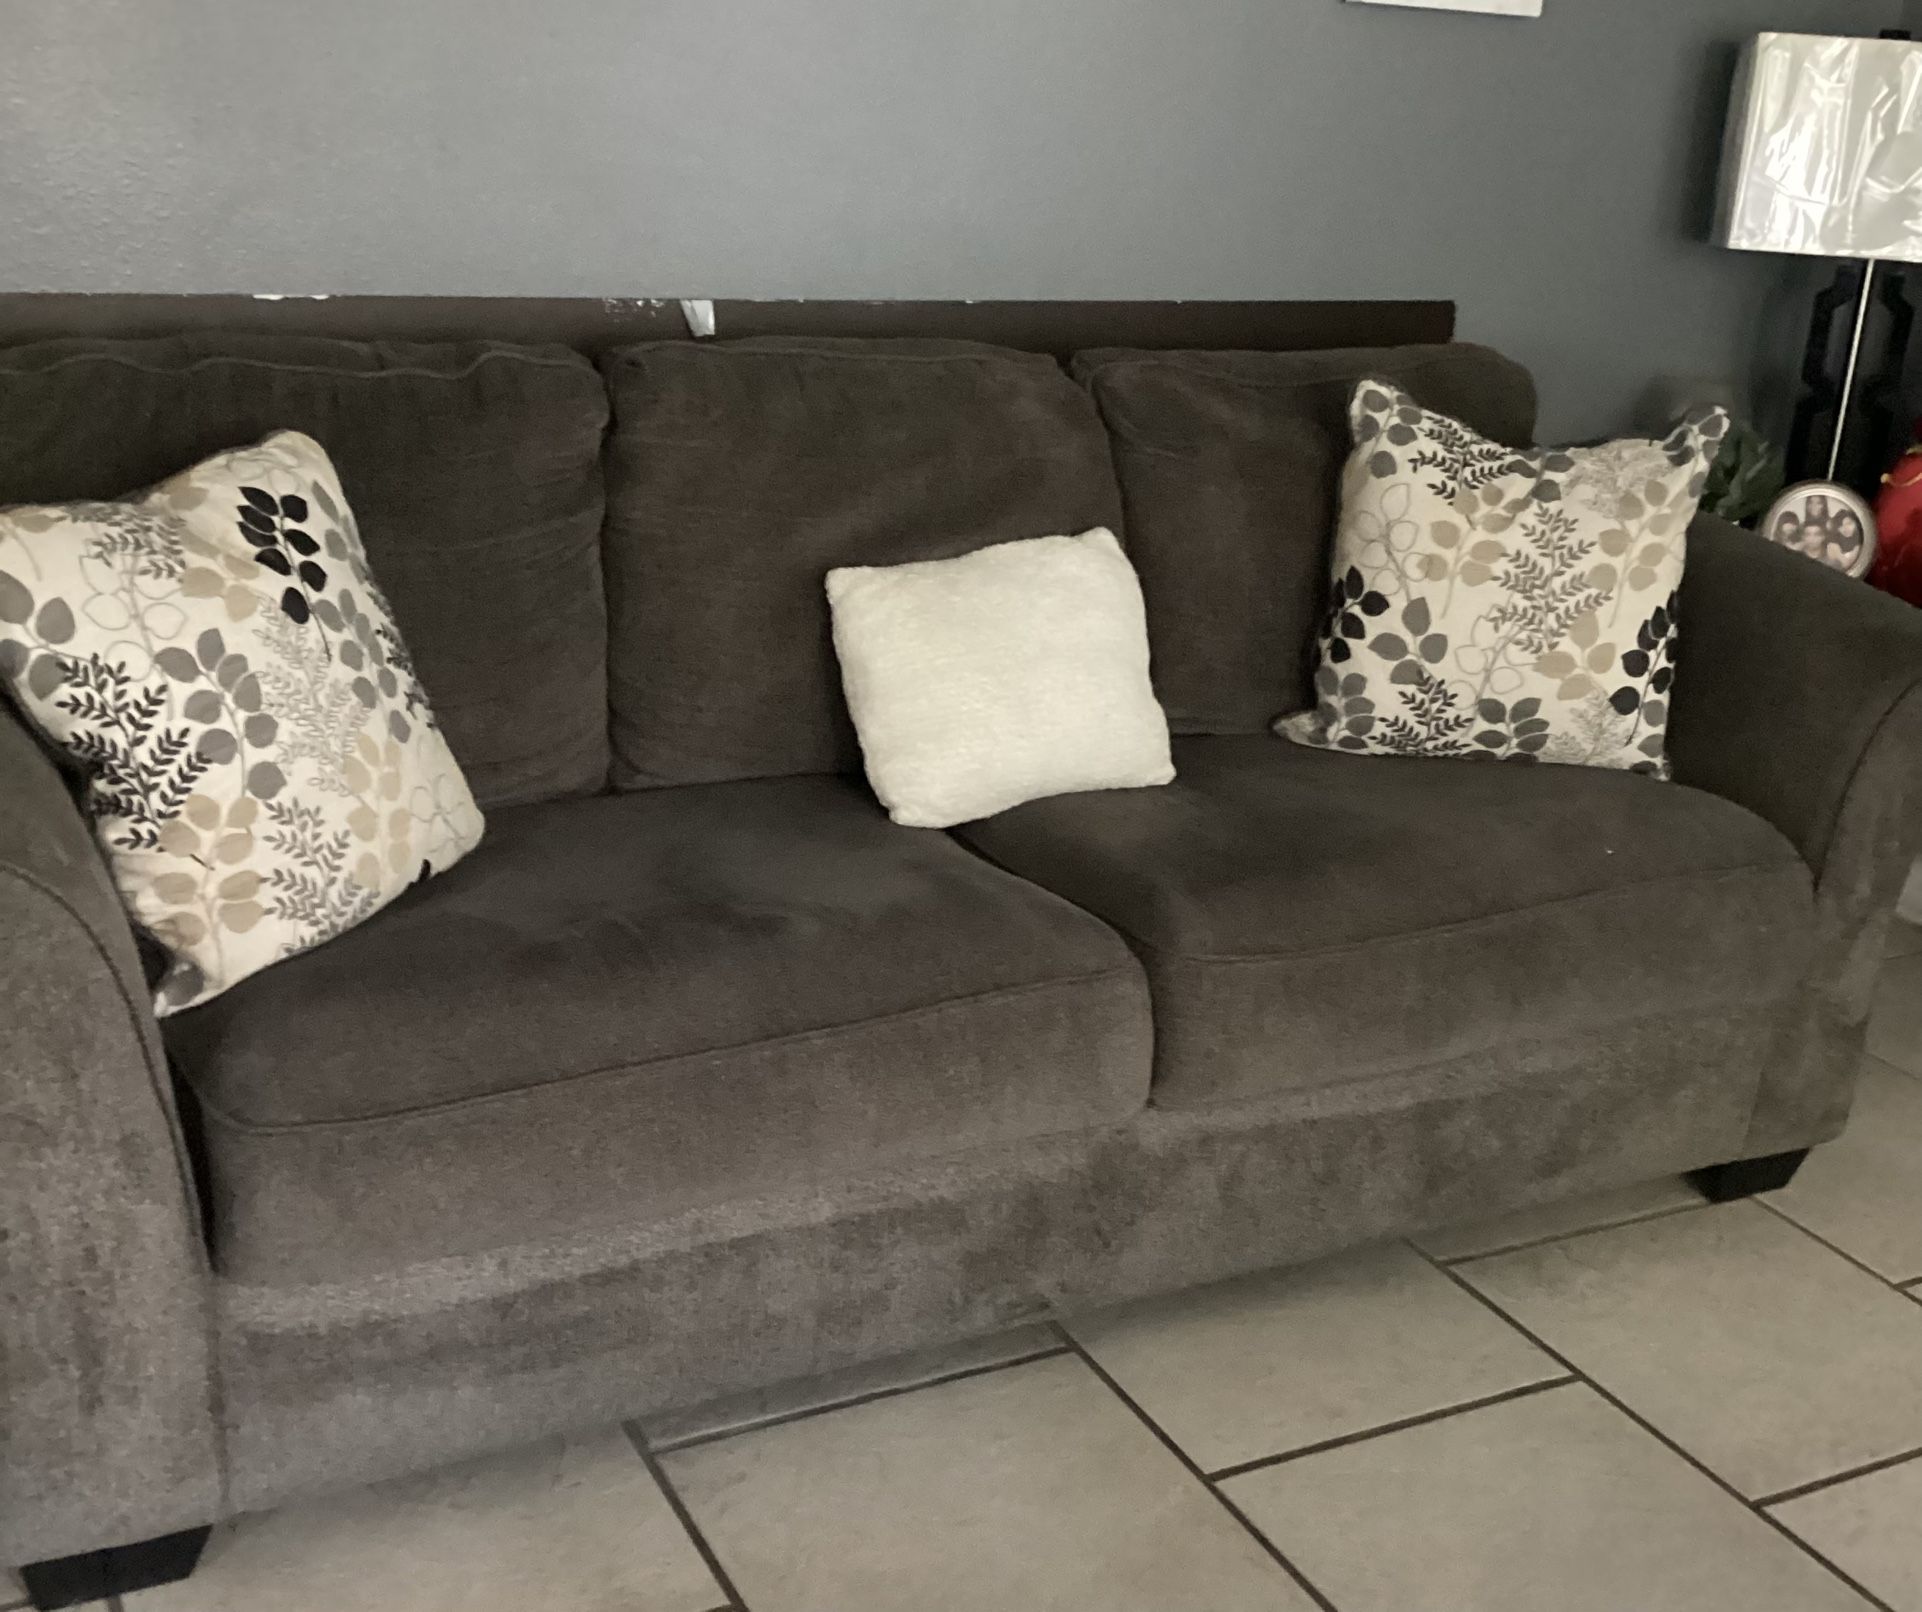 USED SET WITH SOFA,LOVE SEAT,LAMPS,TABLES IN GOOD CONDITION..$450 DLLS..PRICE IS FIRM/NO DELIVERY 